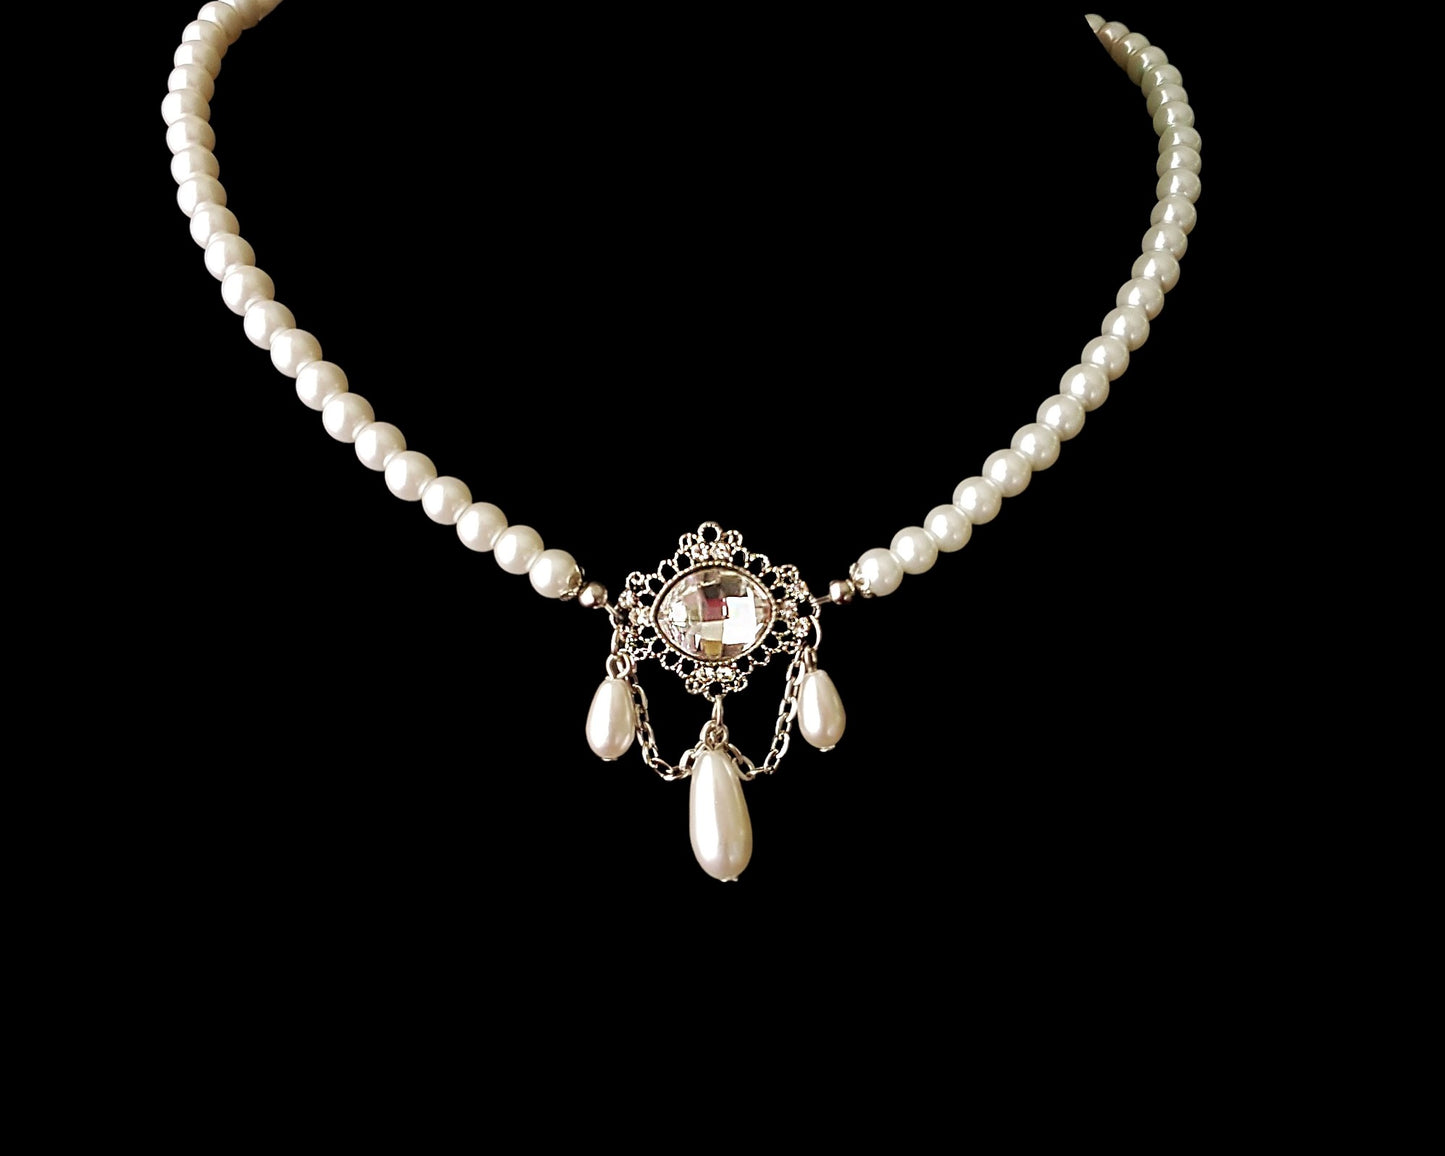 Victorian Style Pearl Crystal Necklace and Earrings Set with white pearl necklace with large clear crystal and three dangling drop pearls, displayed on black. 